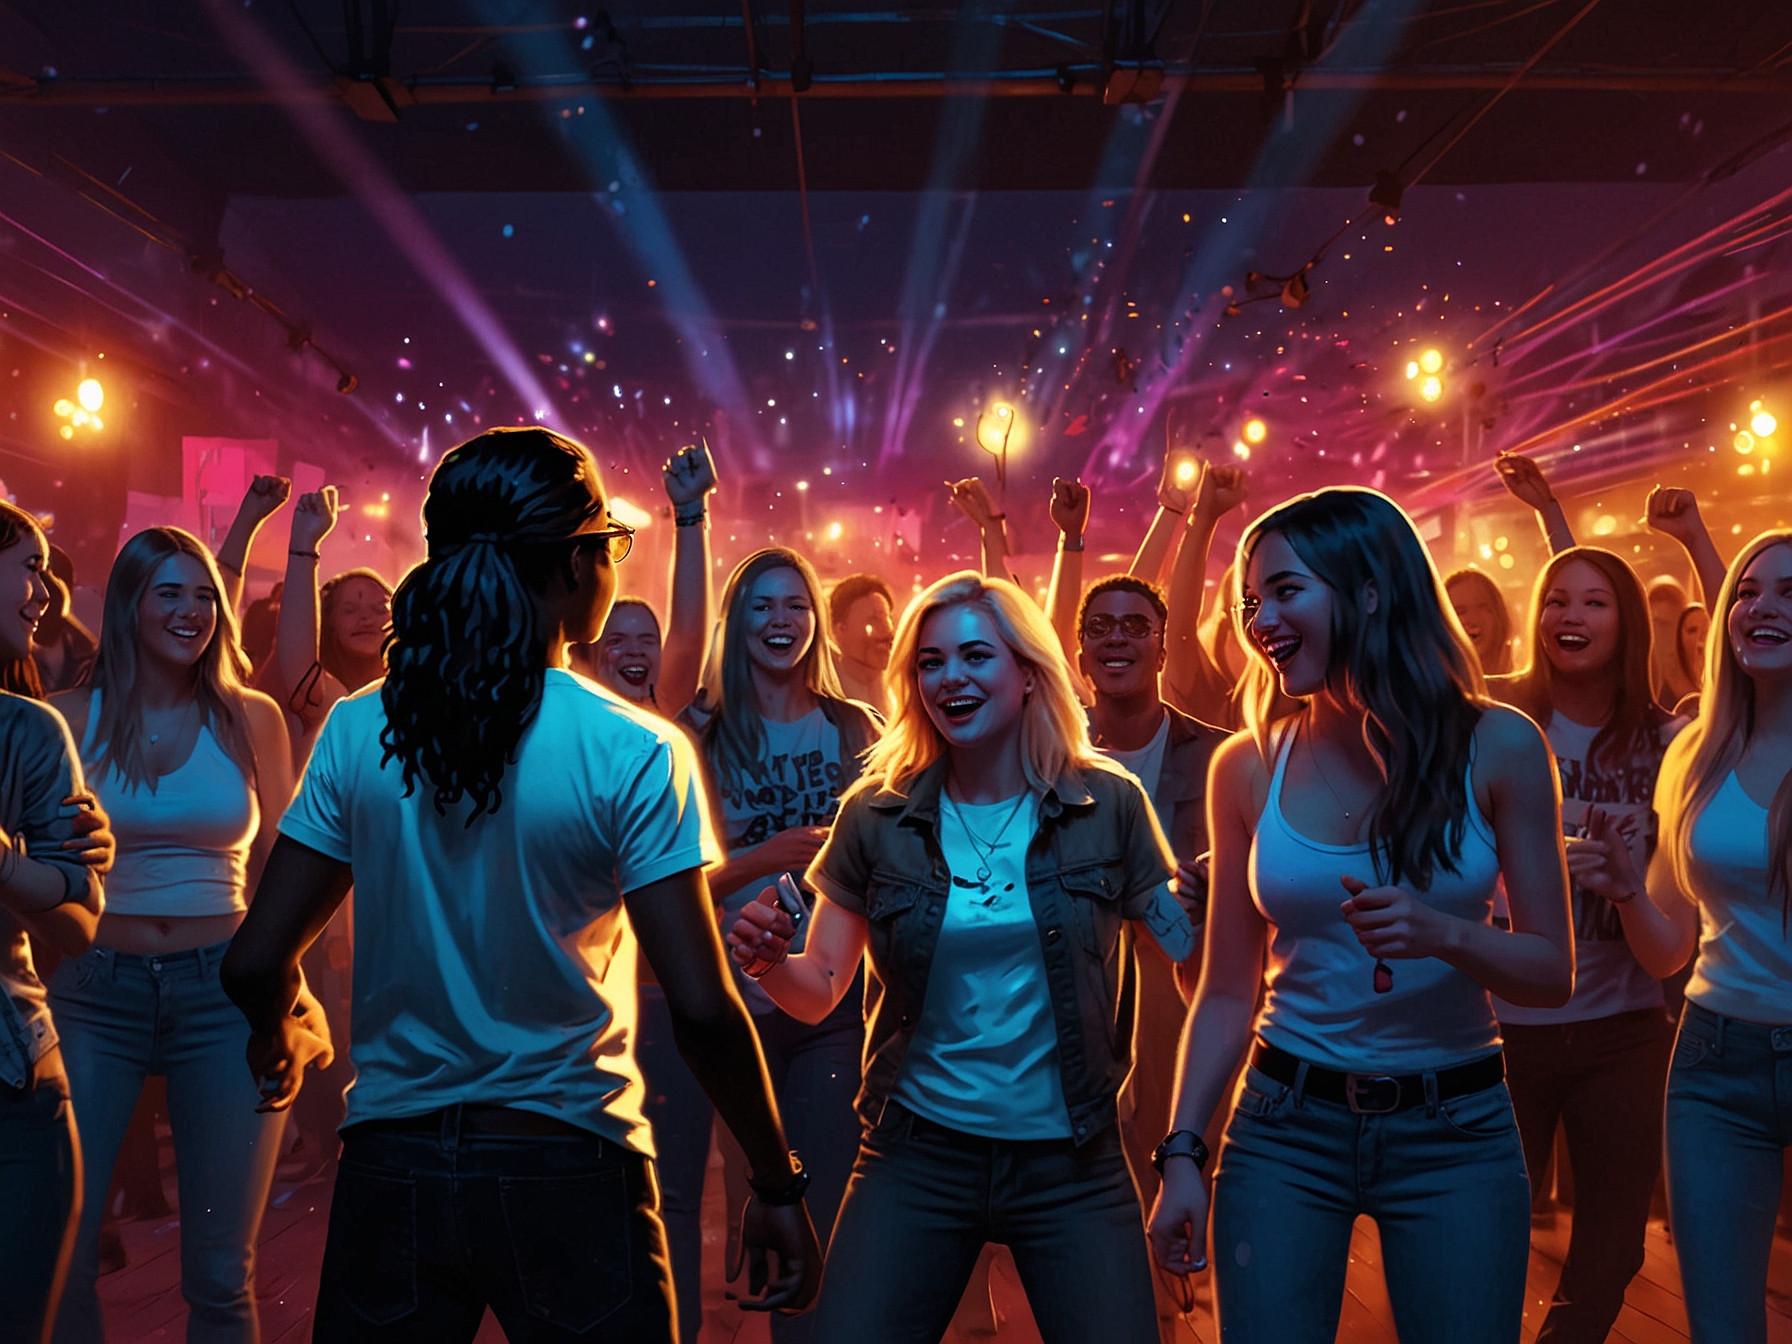 A nostalgic 2000s-themed dance party scene with vibrant lights and enthusiastic fans, representing the revived interest in the iconic noughties dance star's music after the TikTok revelation.